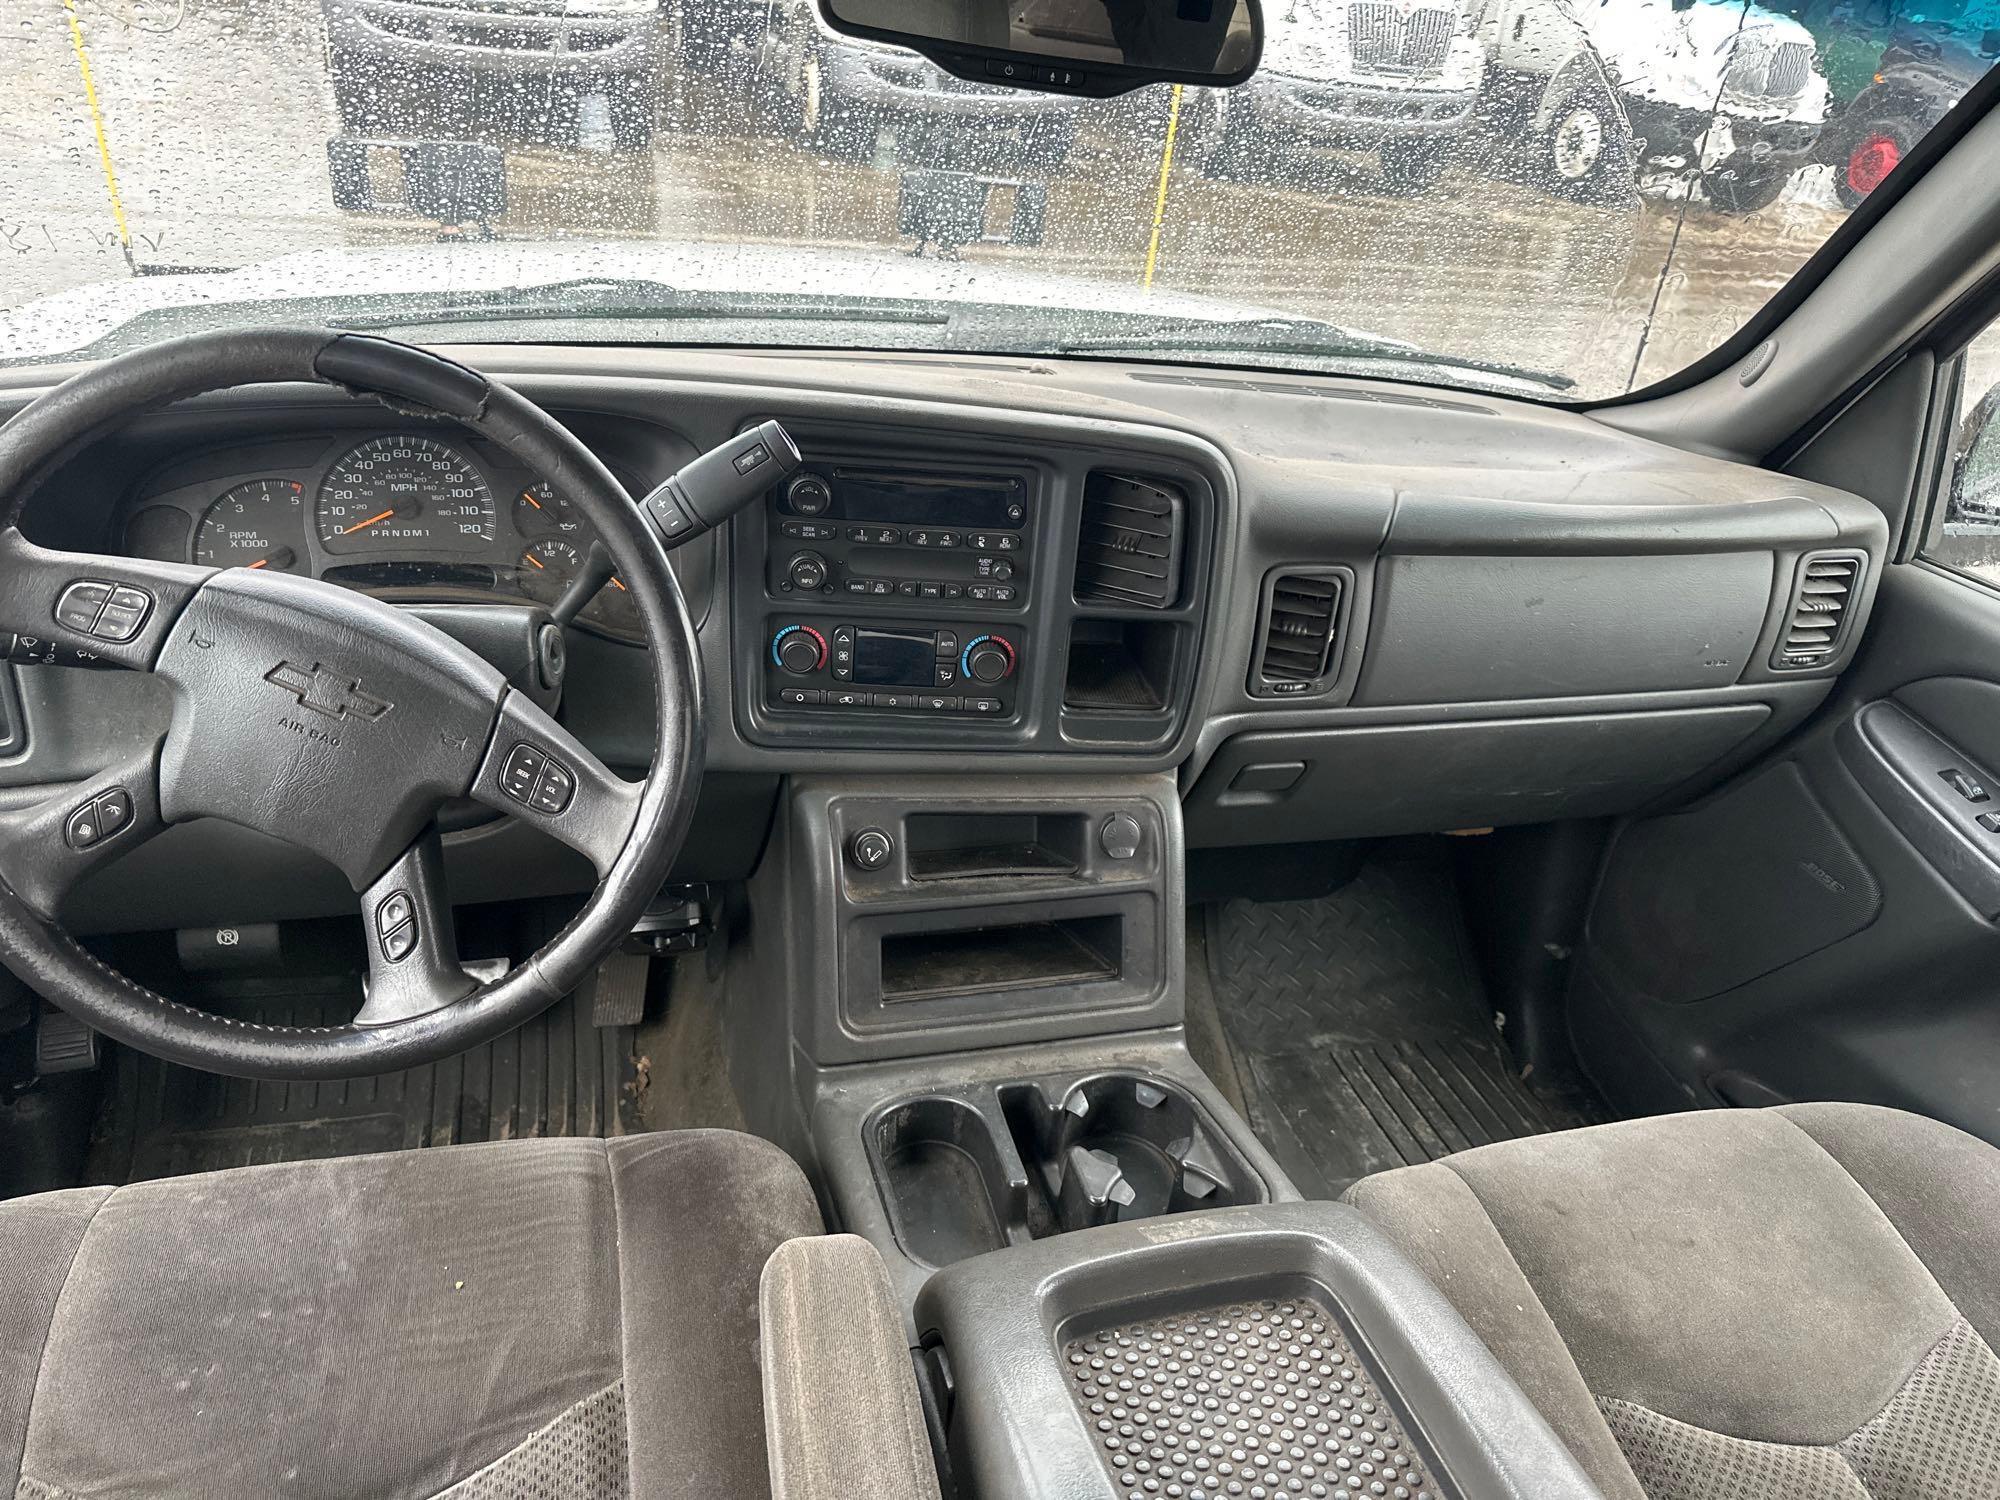 2007 CHEVY 2500 PICKUP TRUCK VN:1GCHK23D37F184011 4x4, powered by diesel engine, equipped with